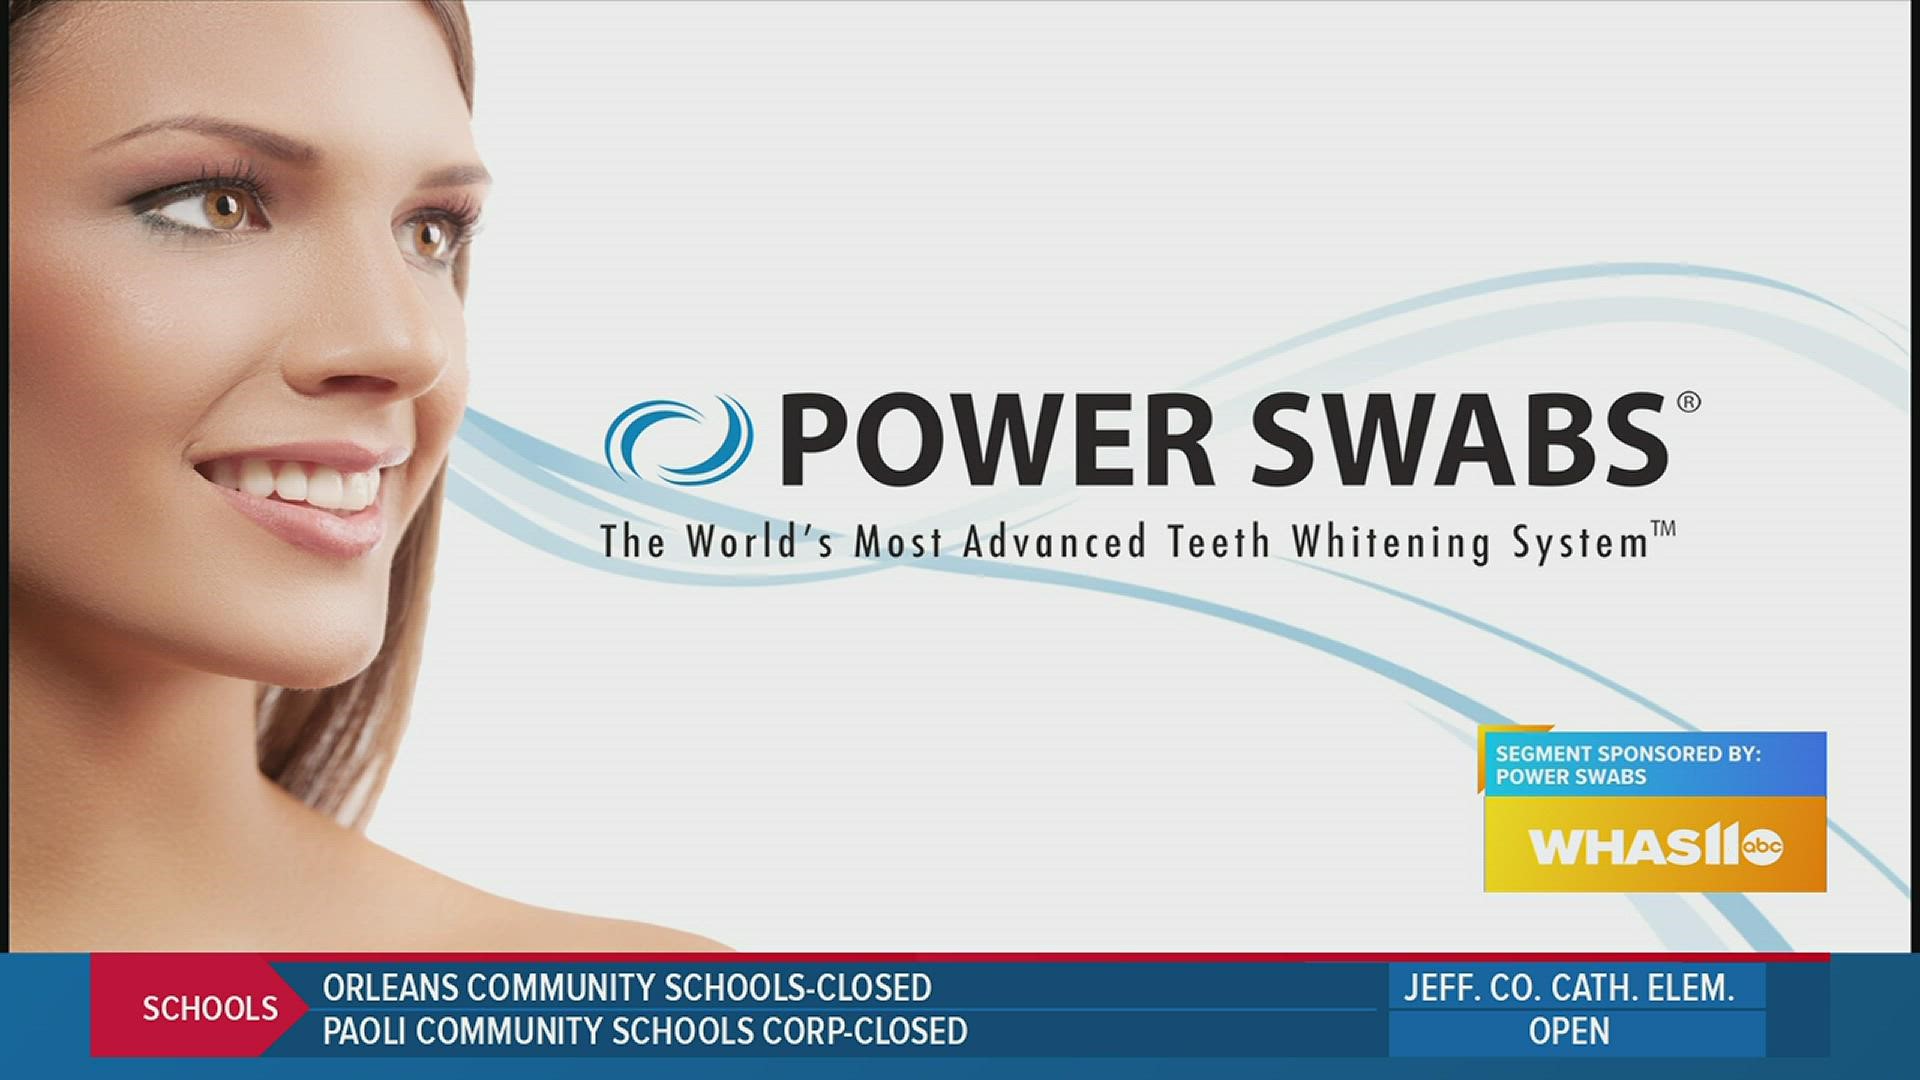 Power Swabs on Great Day Live!